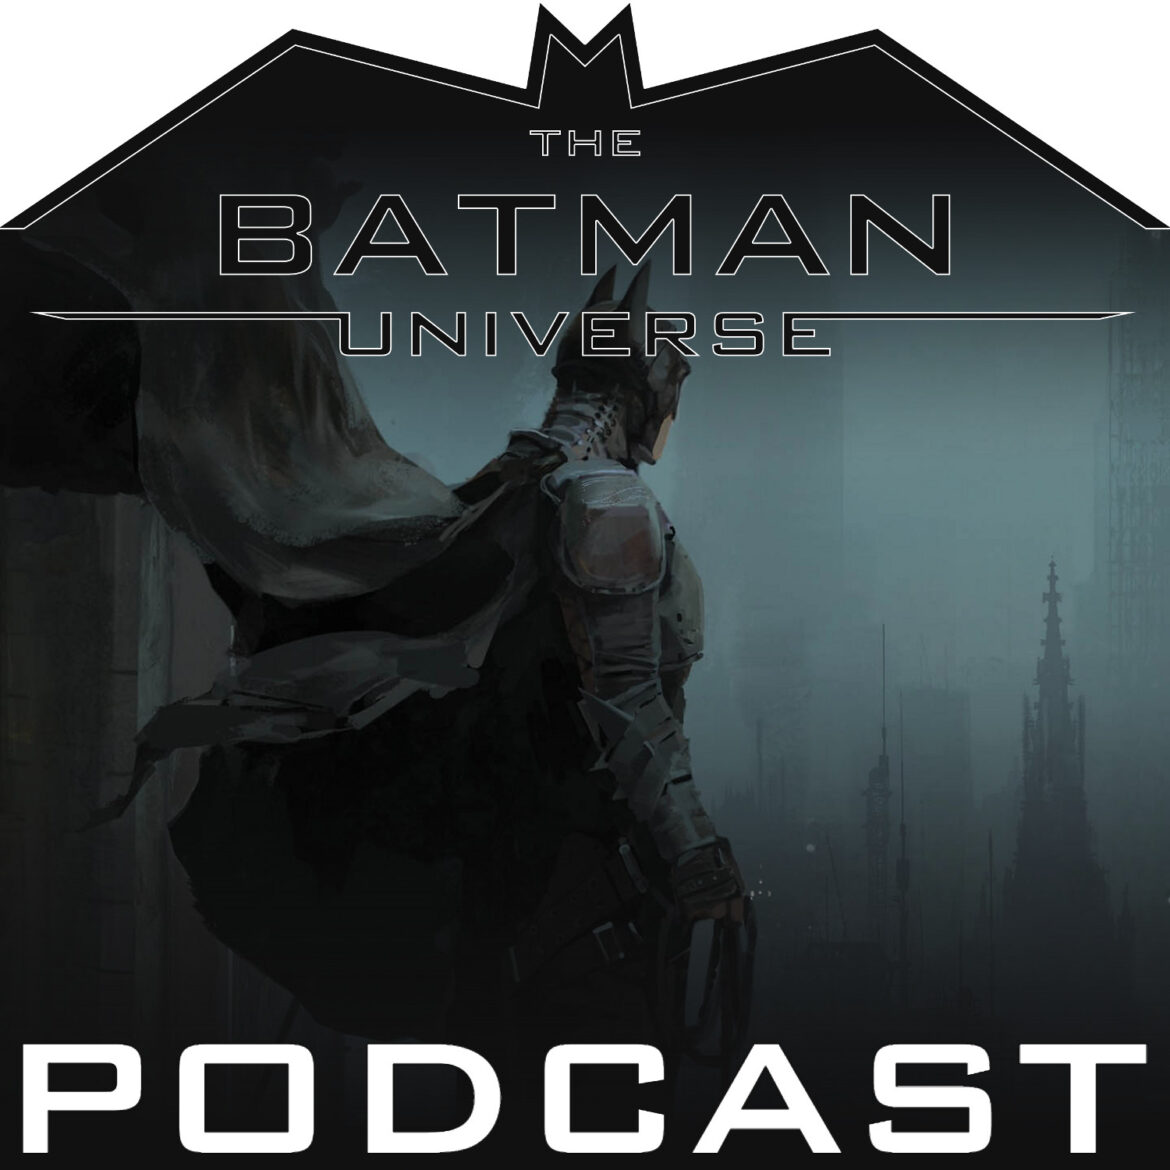 The Art of The Batman Discussion